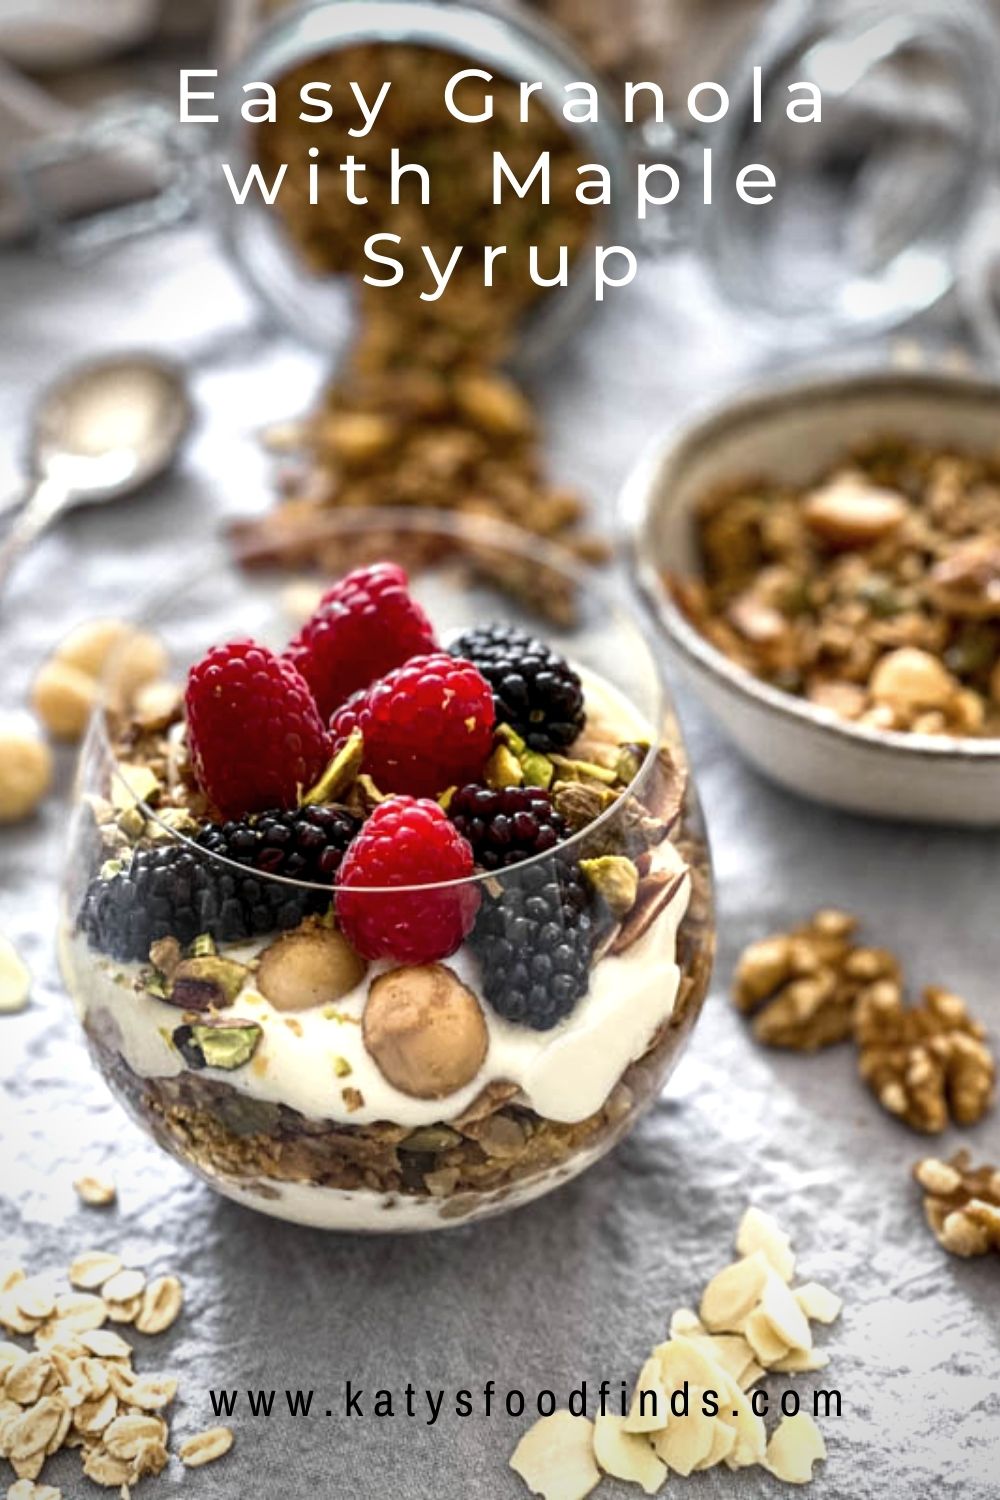 Easy Granola with Maple Syrup - Katy's Food Finds